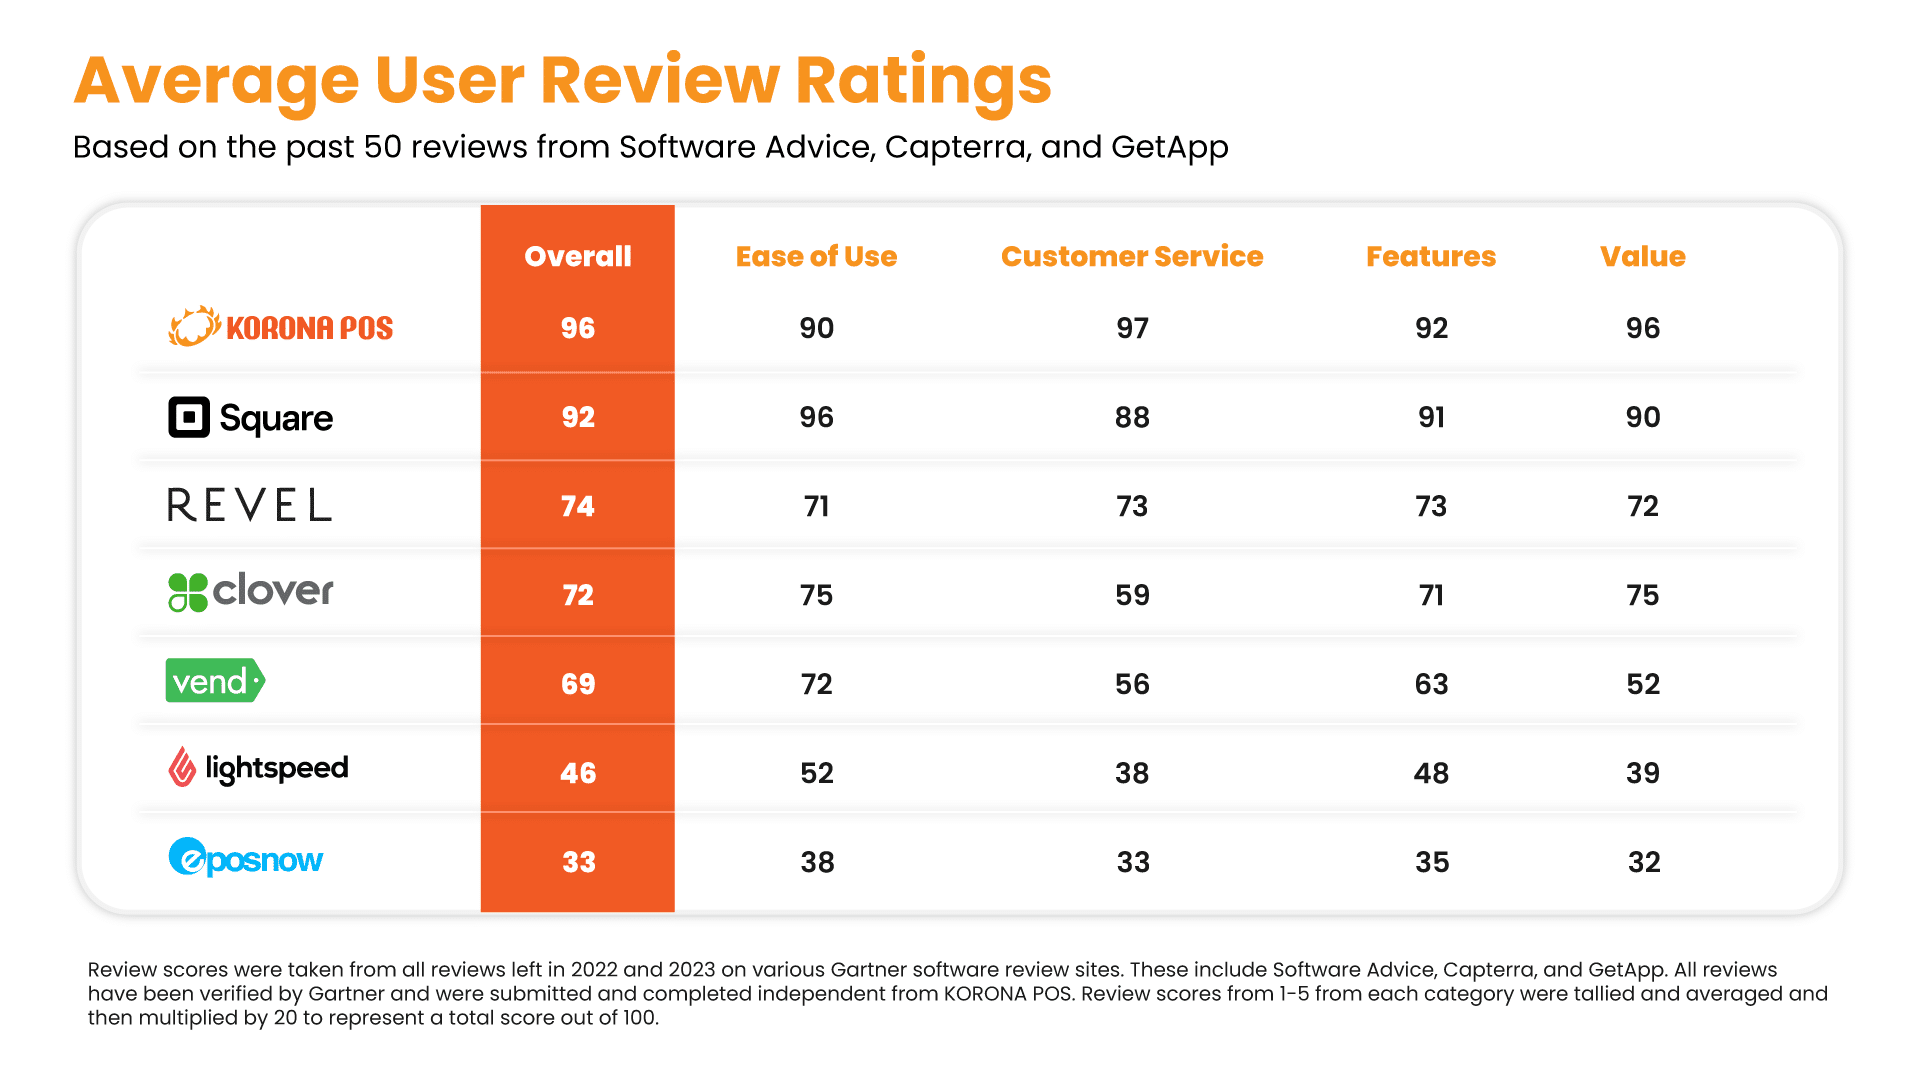 Chart comparing aggregated product reviews from 2023 from Capterra, Software Advice, and GetApp for KORONA POS, Square, Revel, Close, Vend, Lightspeed, and Epos Now